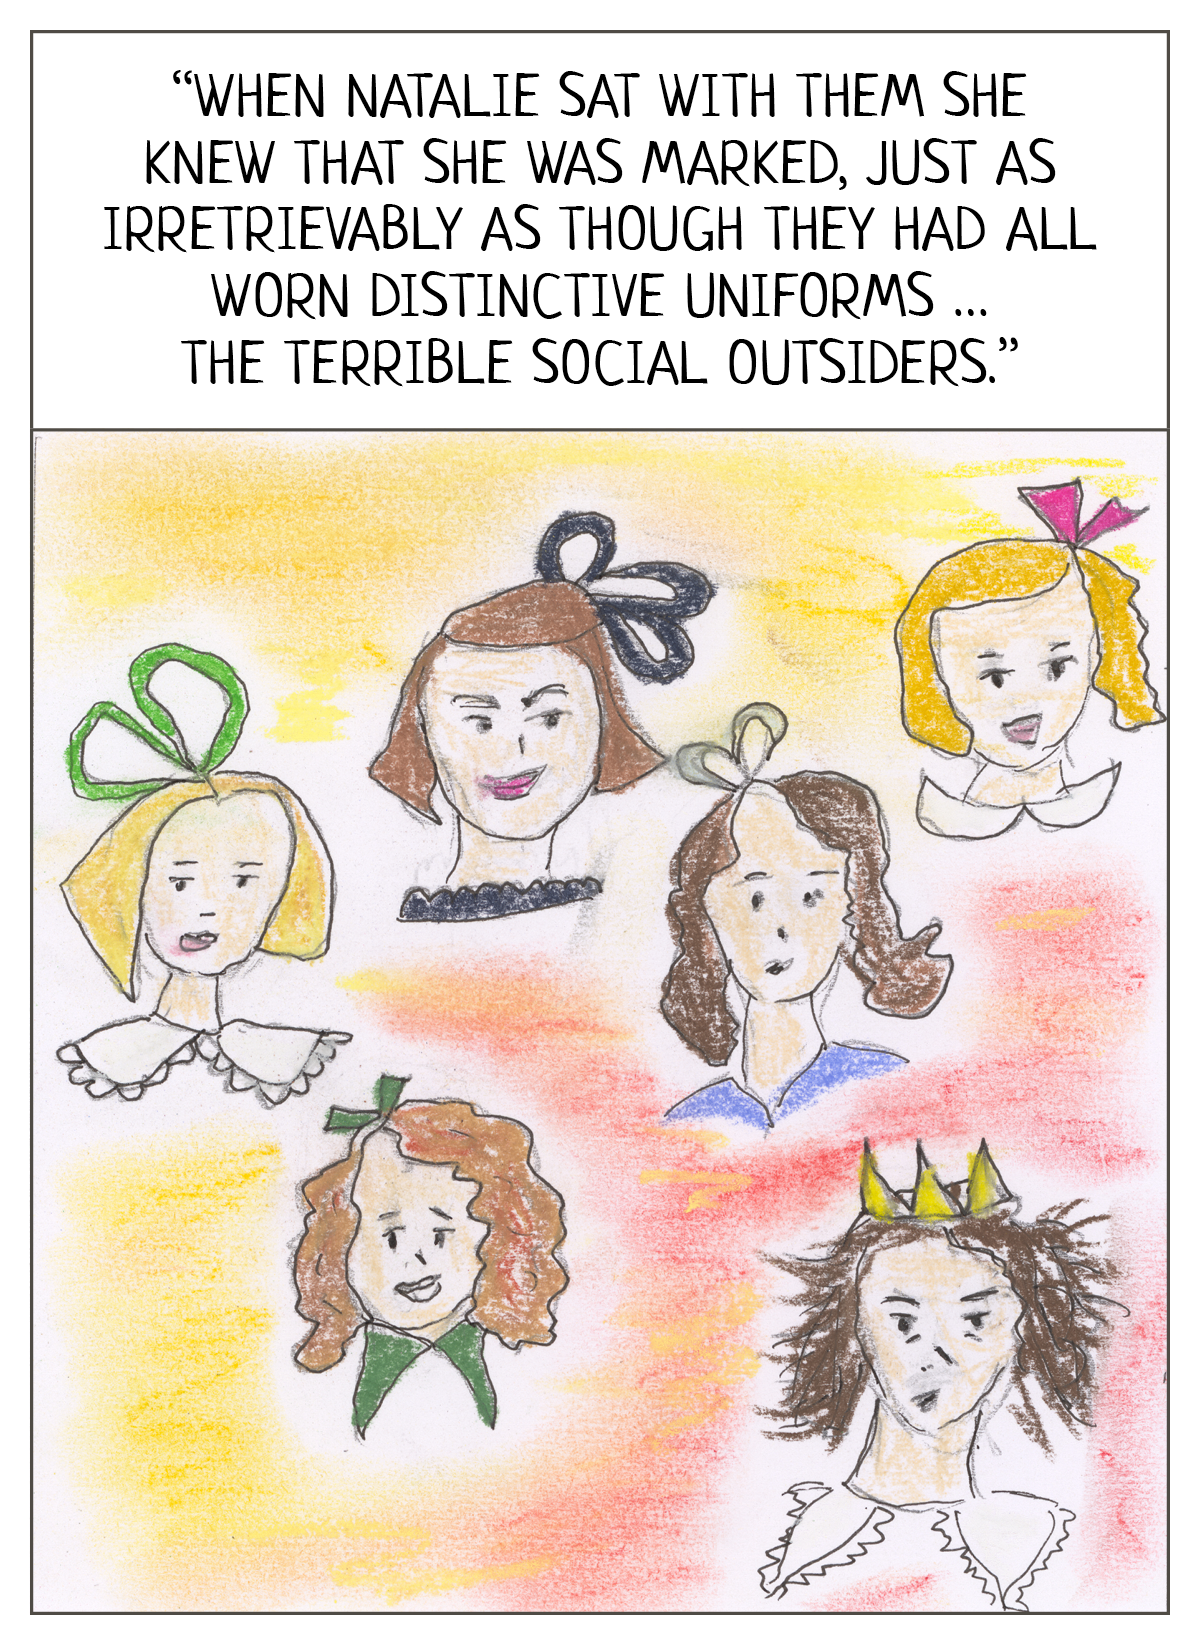 Quotes from Jackson’s text: “When Natalie sat with them she knew that she was marked, just as irretrievably as though they had all worn distinctive uniforms … the terrible social outsiders.”   Image shows the faces of six girls depicted in 1930s style with hairbows. They are white, mostly plain or young looking. One is wearing a tiara instead of a hairbow and is frowning. 